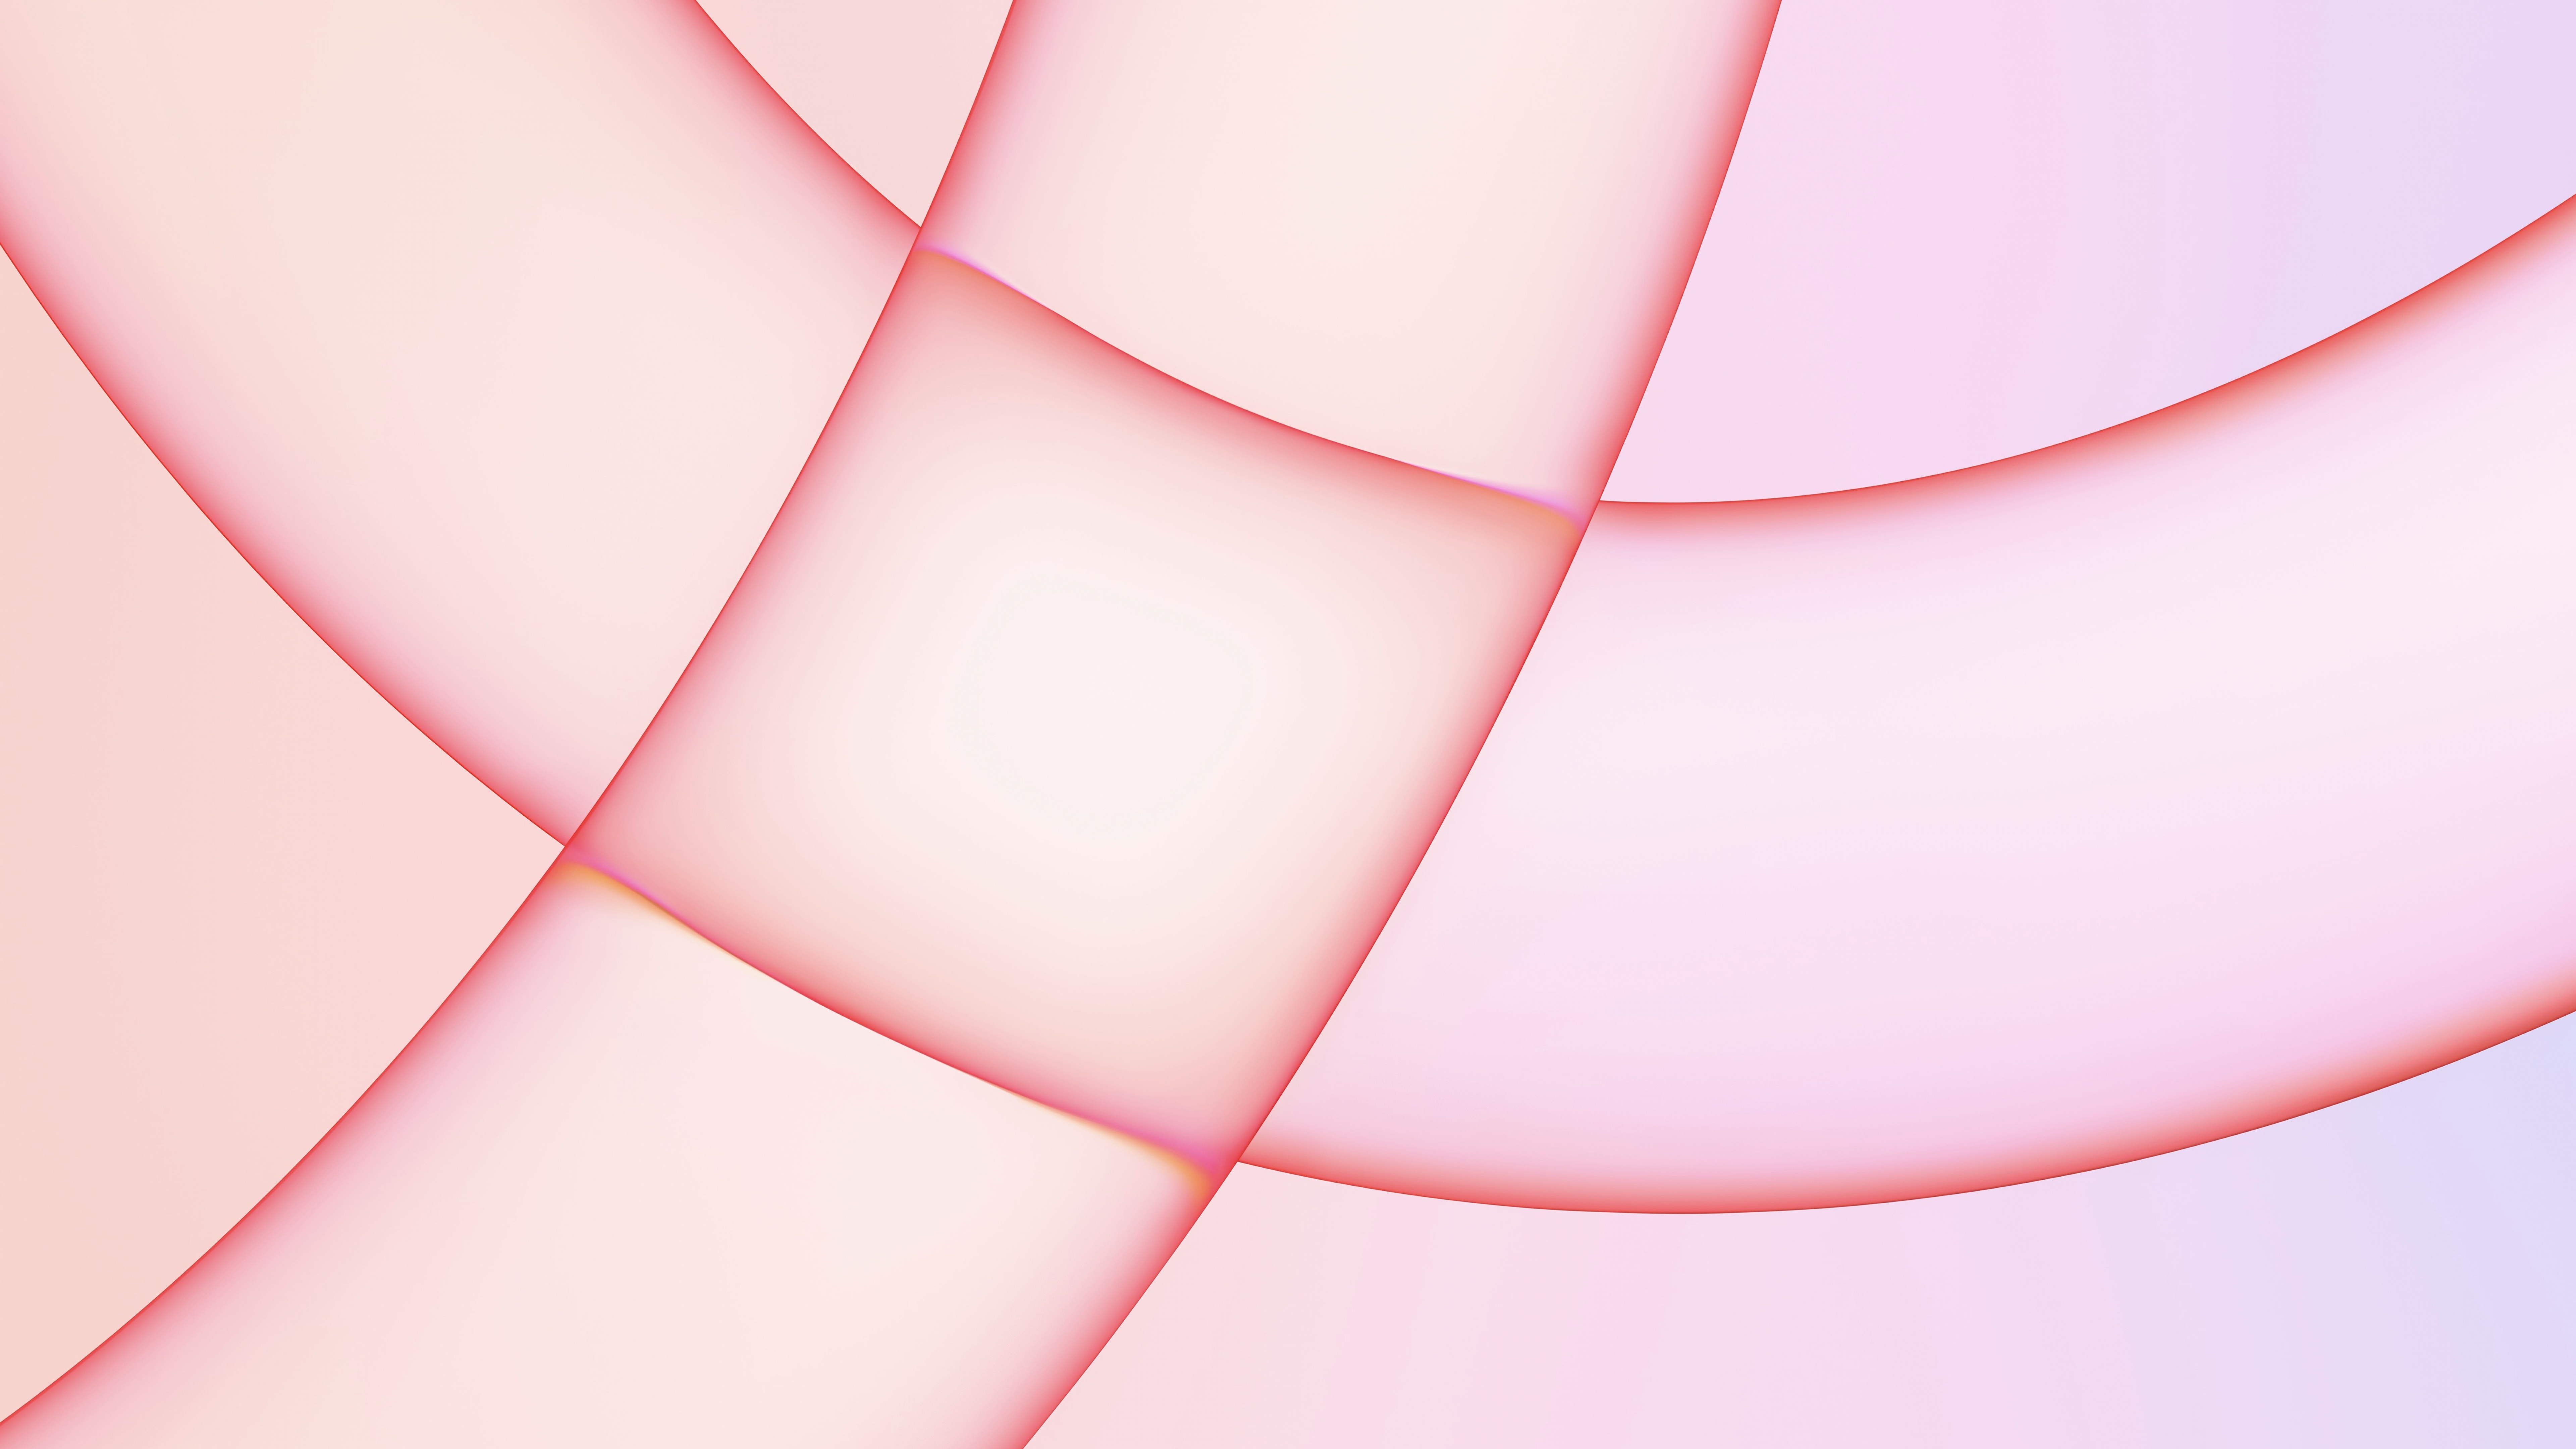 Imac 21 Wallpaper 4k Apple Event 21 Stock Pink Background 5k Abstract 5249